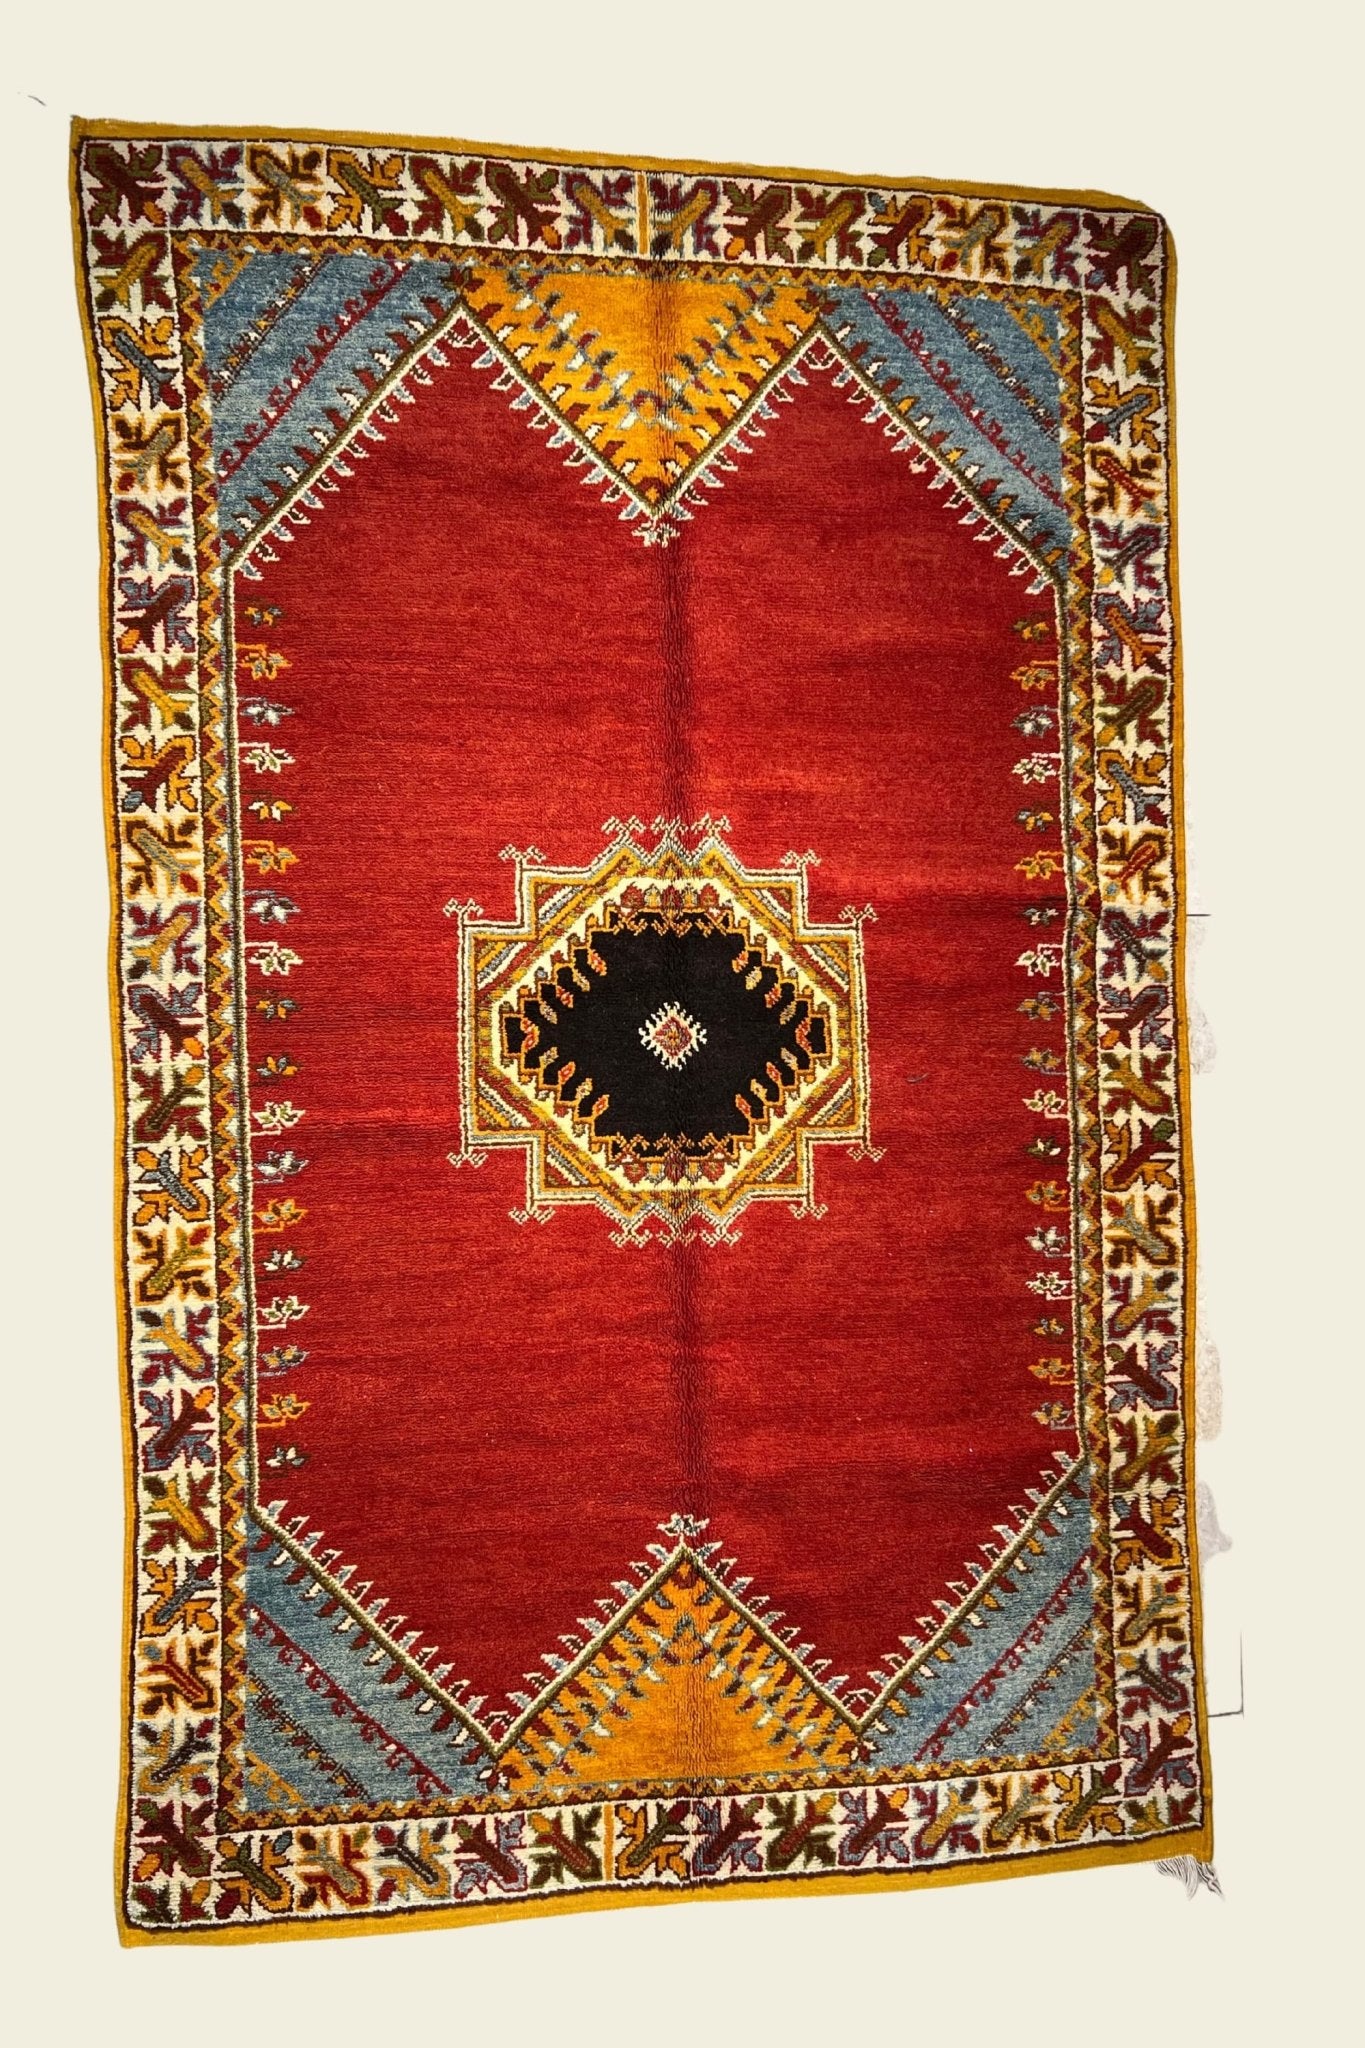 Moroccan area rug from Tazenakht, Wool and Thread, 5'1" x 8'2" Or 155 cm x 250 cm - Dar Bouchaib Marrakech